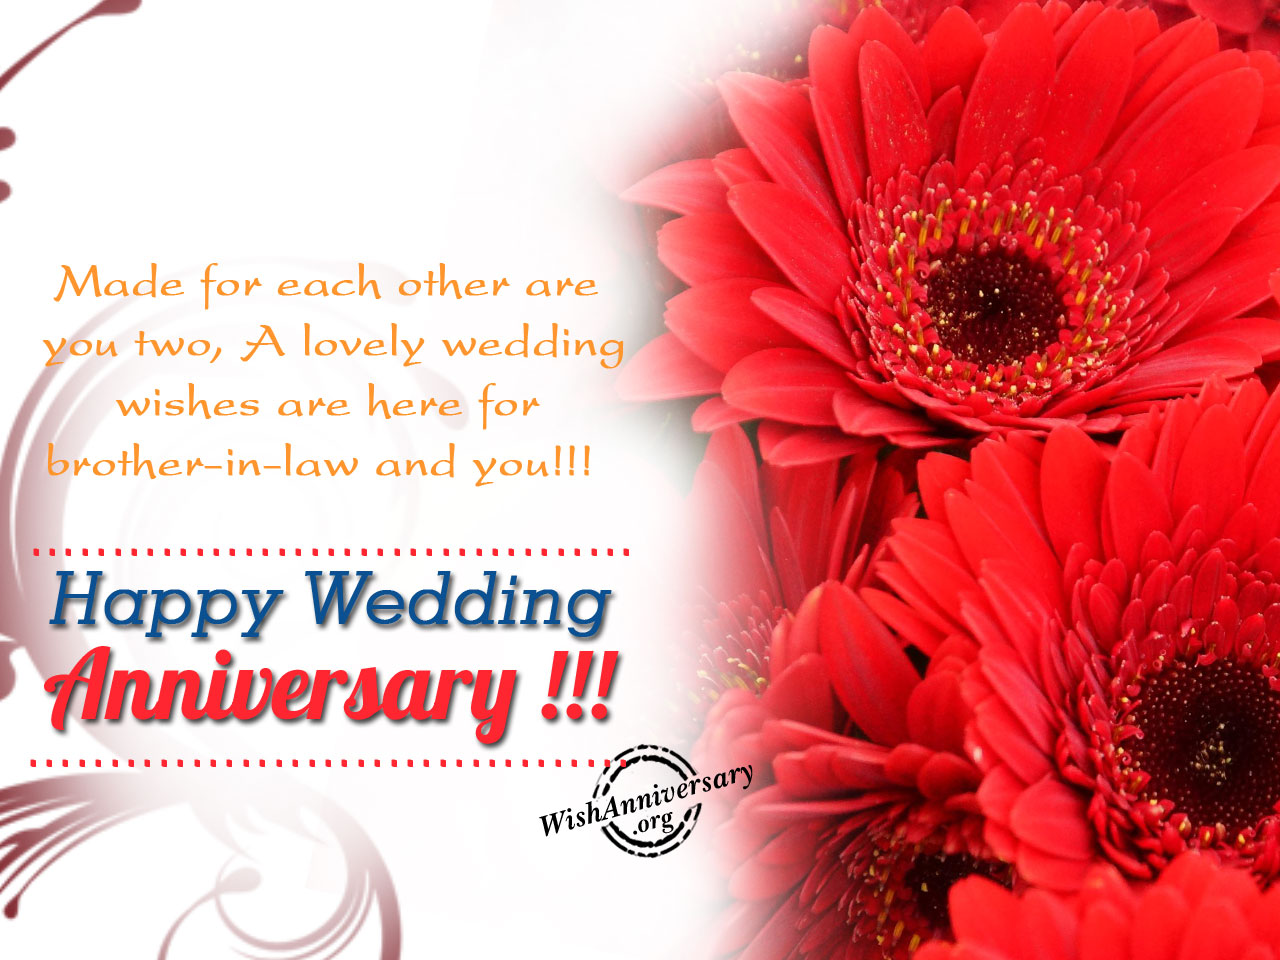 Happy anniversary wishes for parents from daughter happy marriage anniversa...